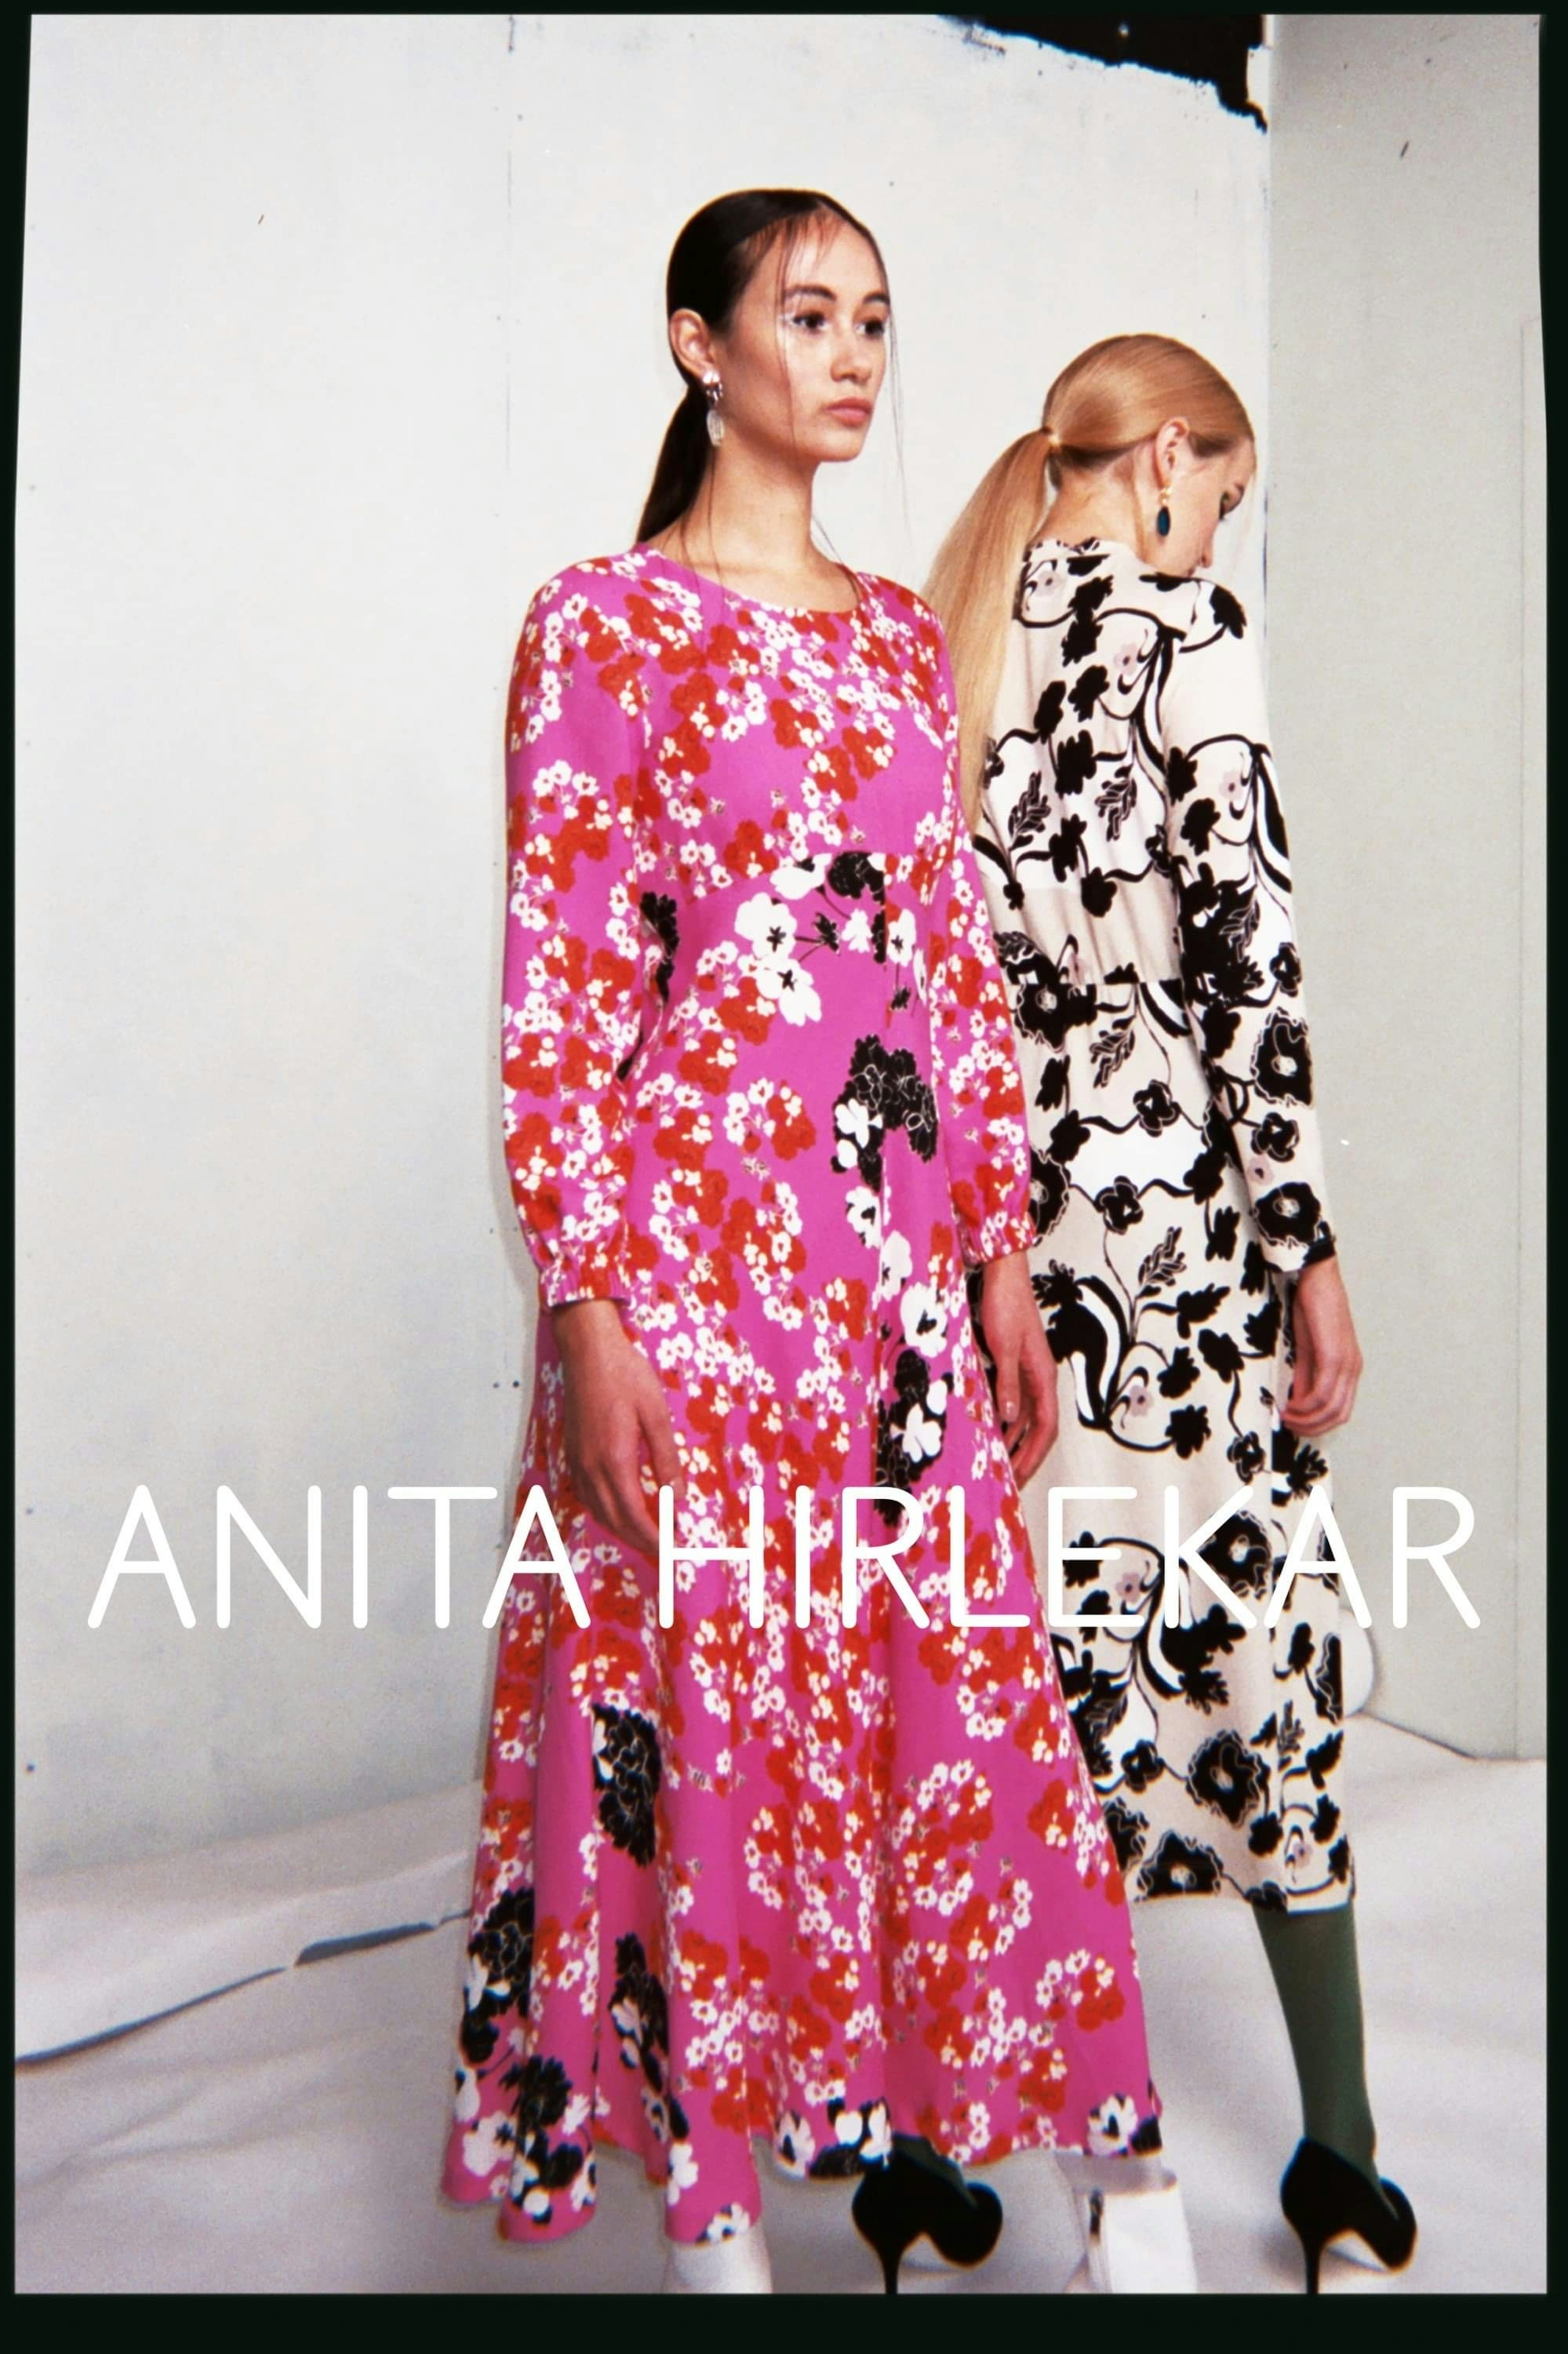 ANITA HIRLEKAR is a womenswear label based in Reykjavik, Iceland. Established in 2014 the eponymous brand creates sophisticated and feminine designs with a playful touch. 